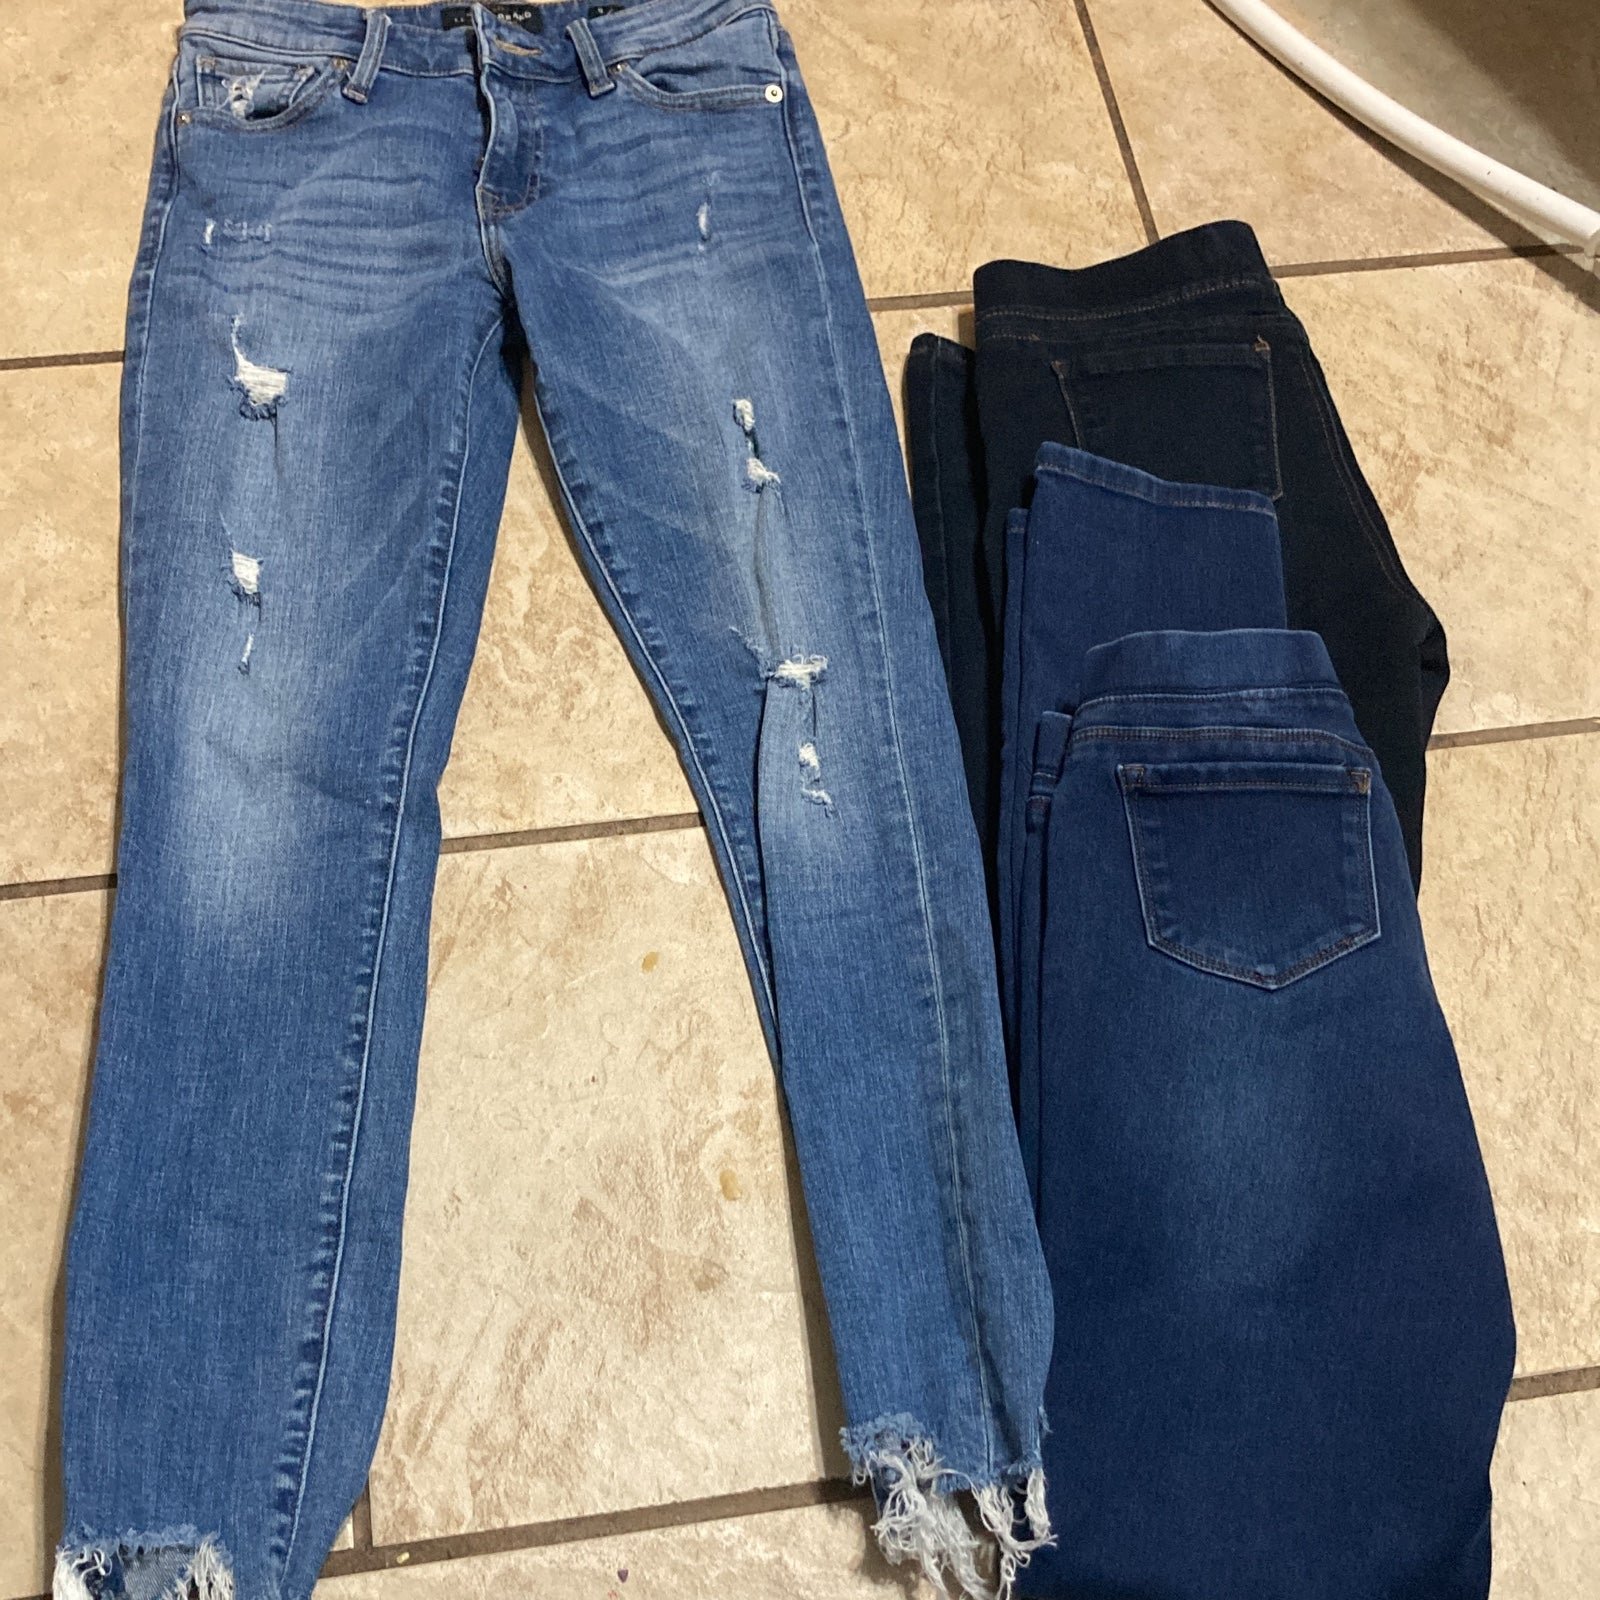 save up to 70% 3 Jeans LSDumsIY3 Everyday Low Prices